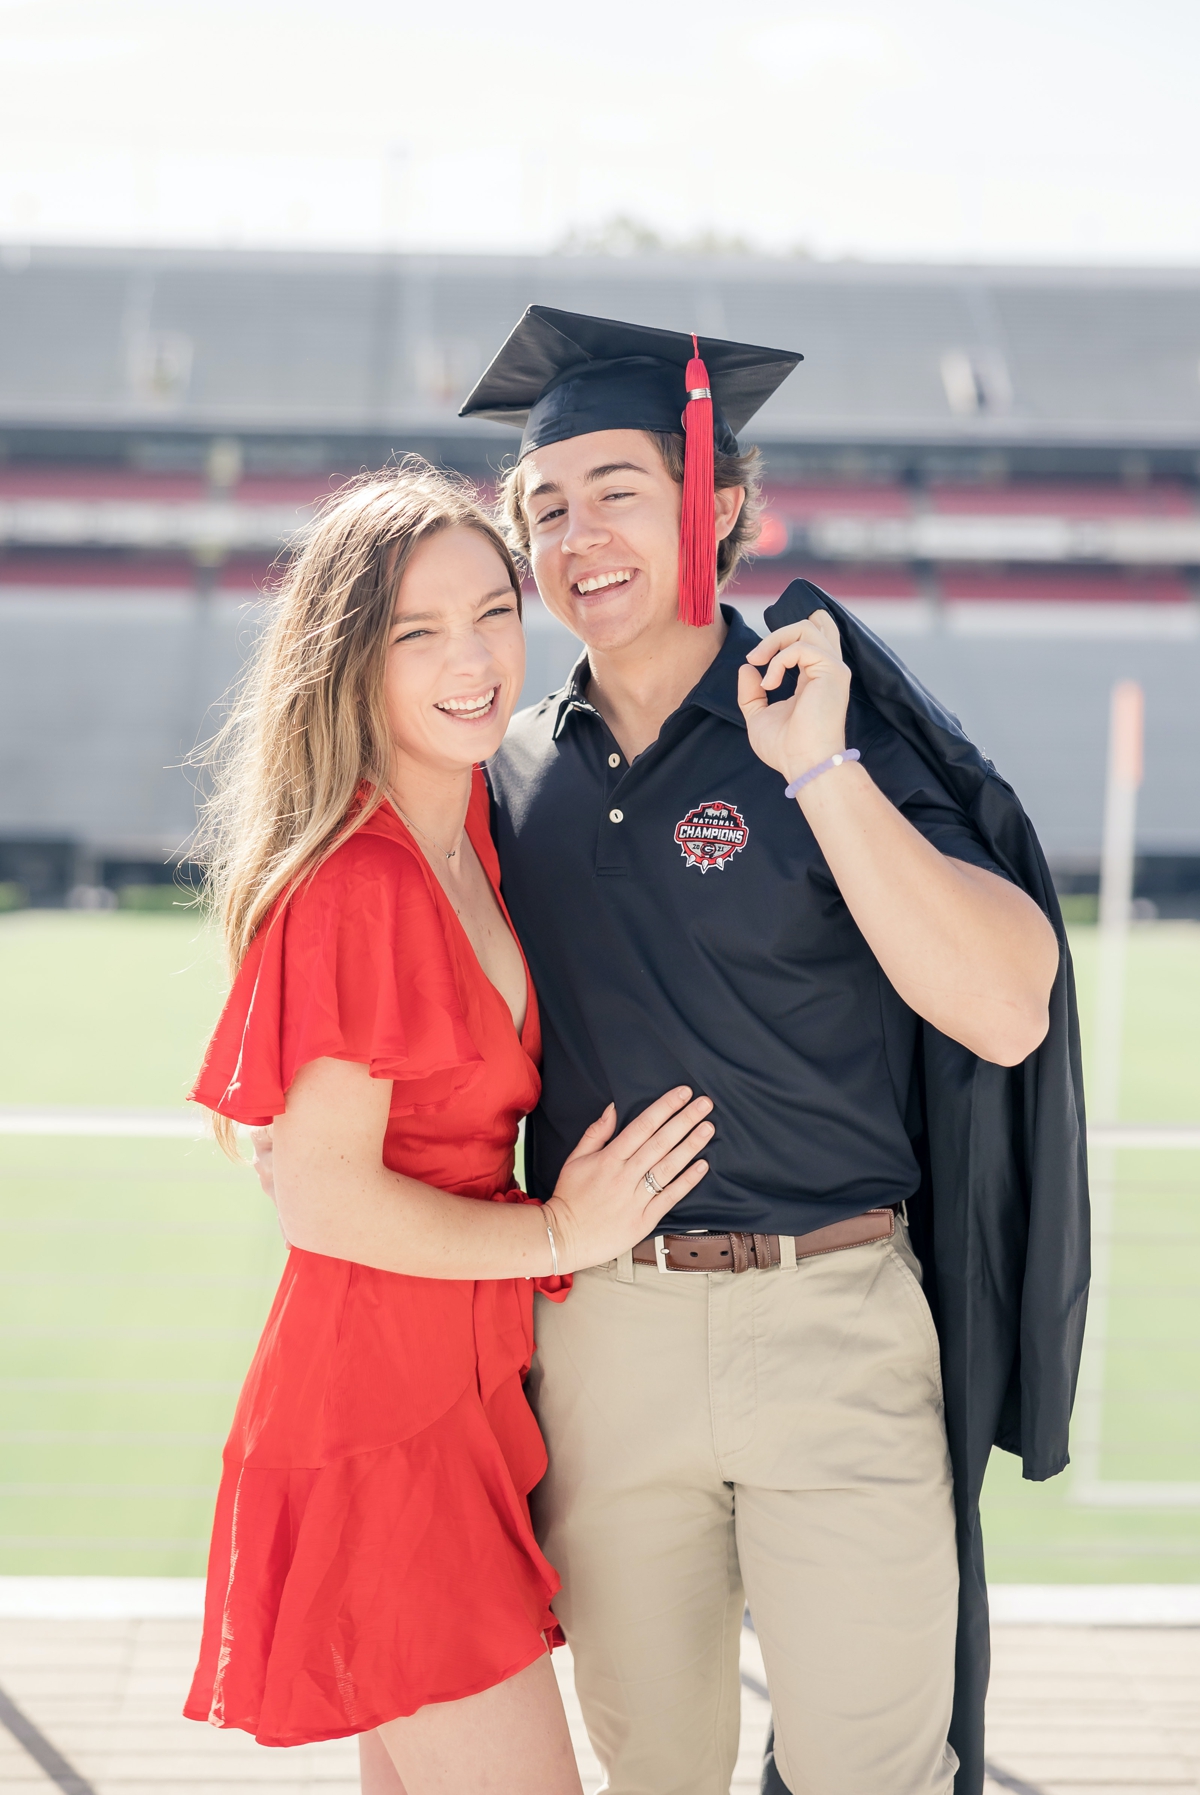 A man and his girlfriend stand on the UGA football field smiling while he wears his graduation cap and has his gown thrown over his shoulder